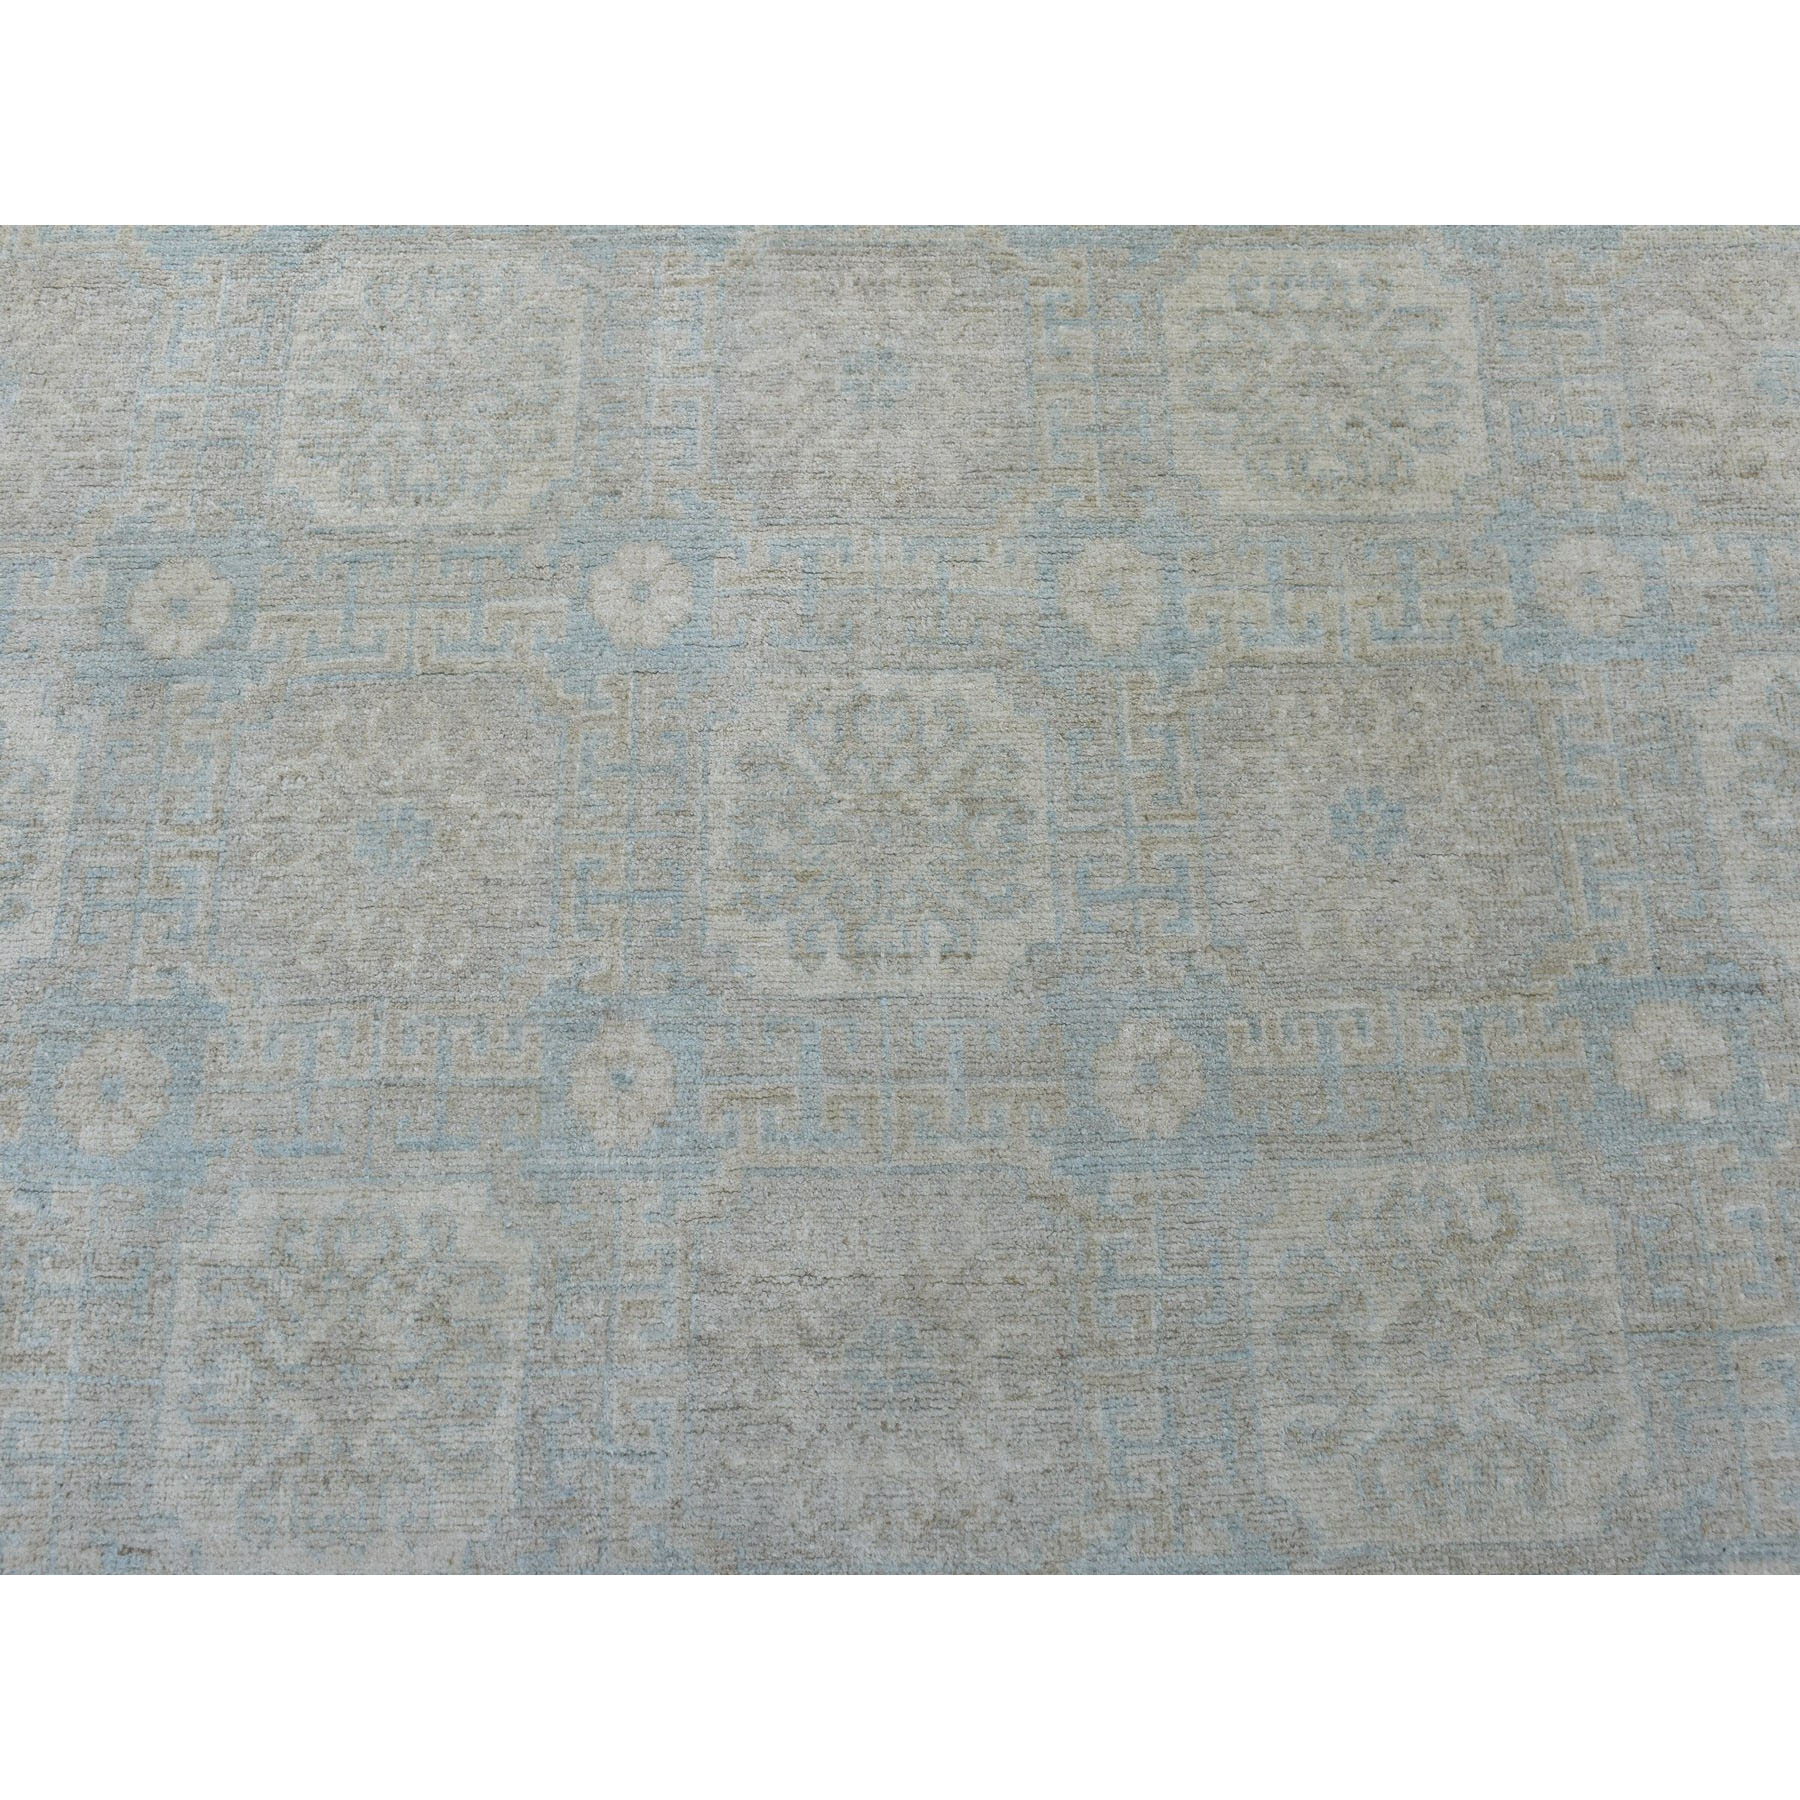 10-3 x13-8  White Wash Peshawar Pure Wool Hand-Knotted Oriental Rug 